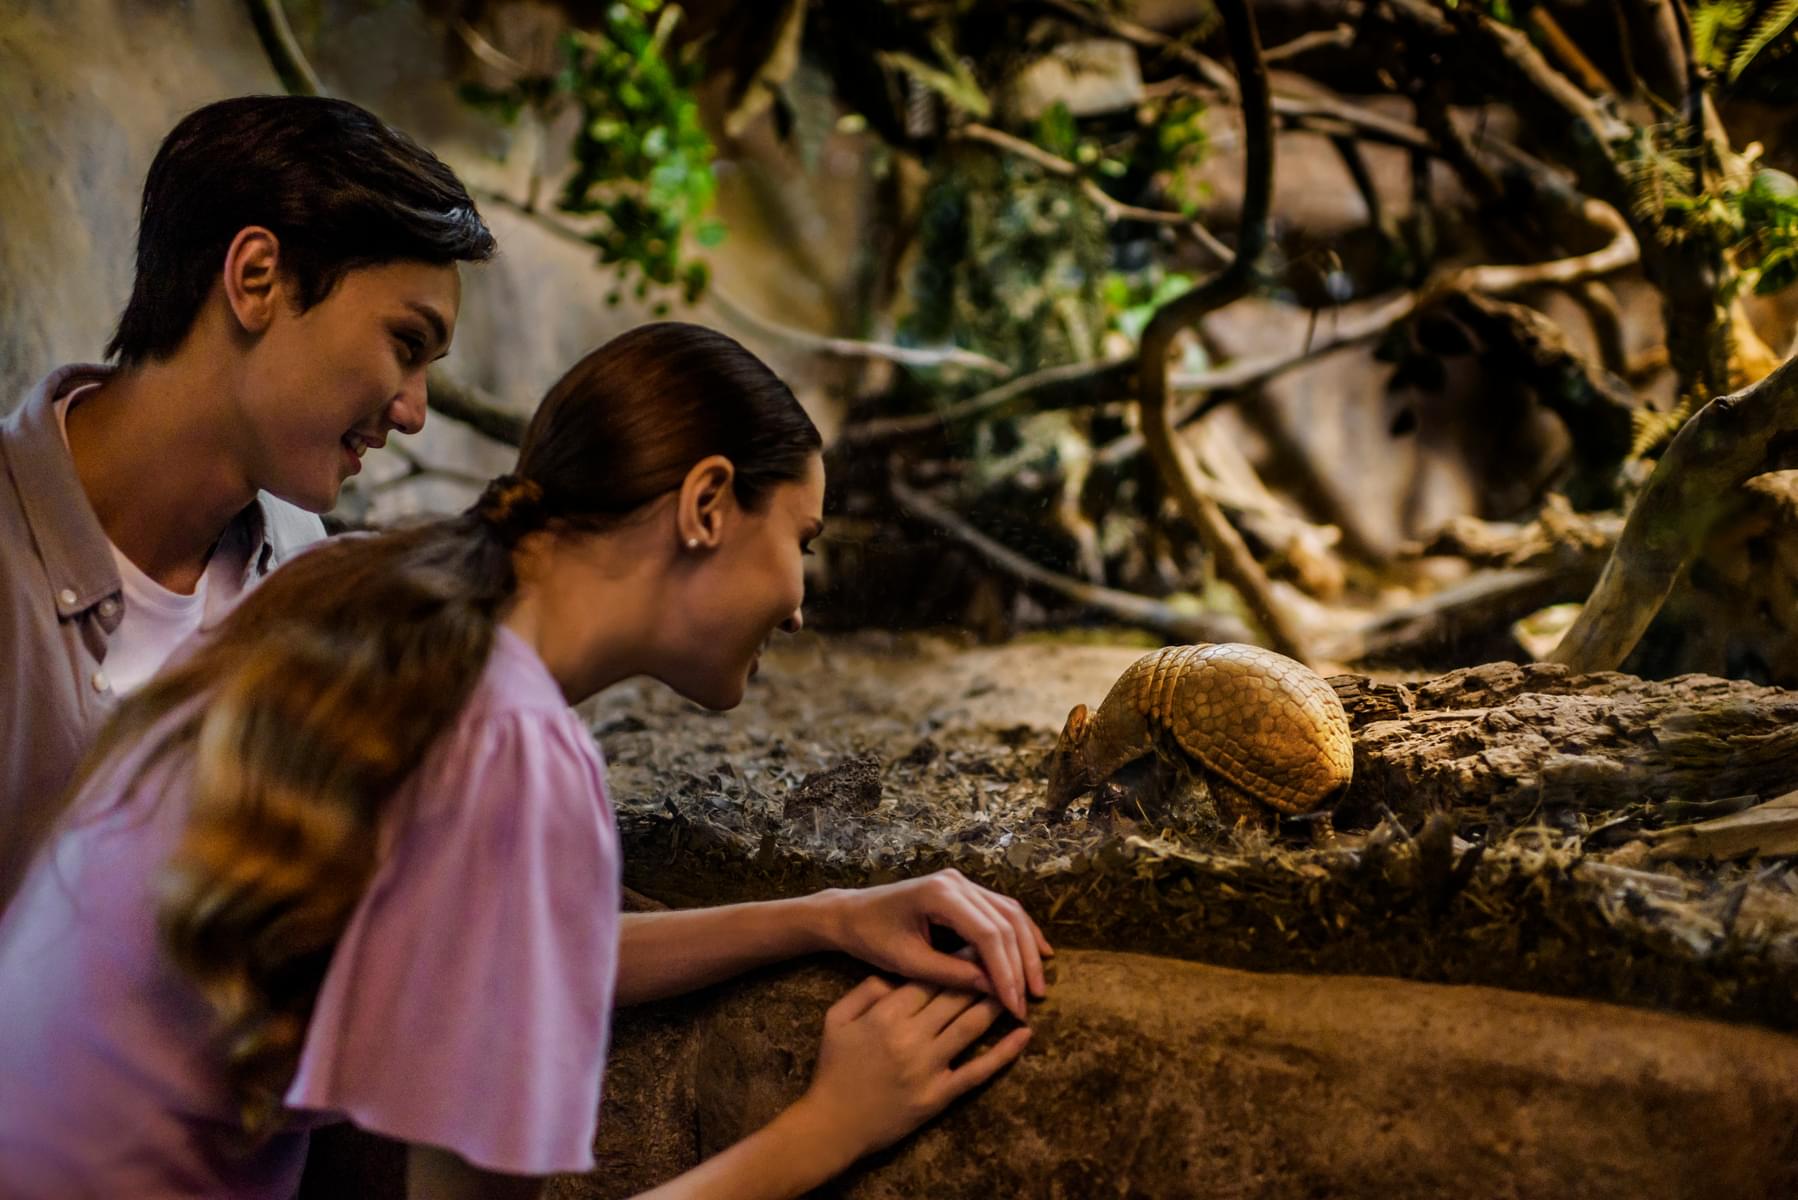 Spend a fun filled day with your family exploring the zoo